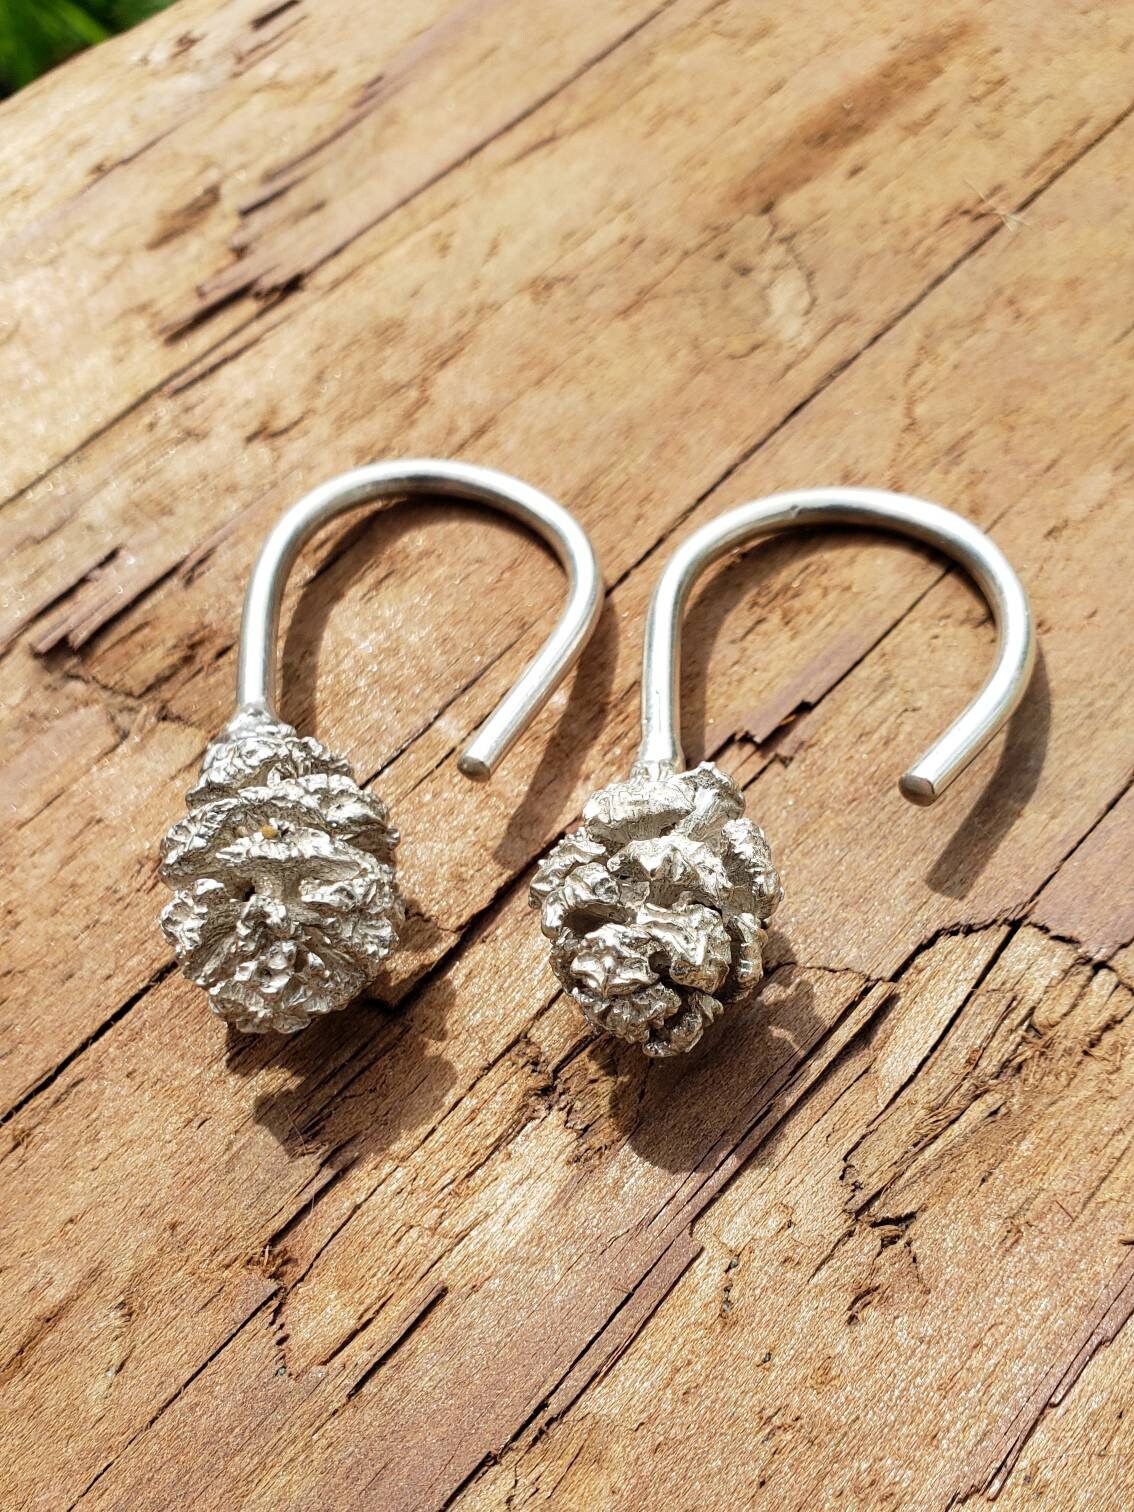 Redwood Cone Cast Sterling Silver Ear Weights - NorCal Forest Jewelry - PNW West Coast Fashion